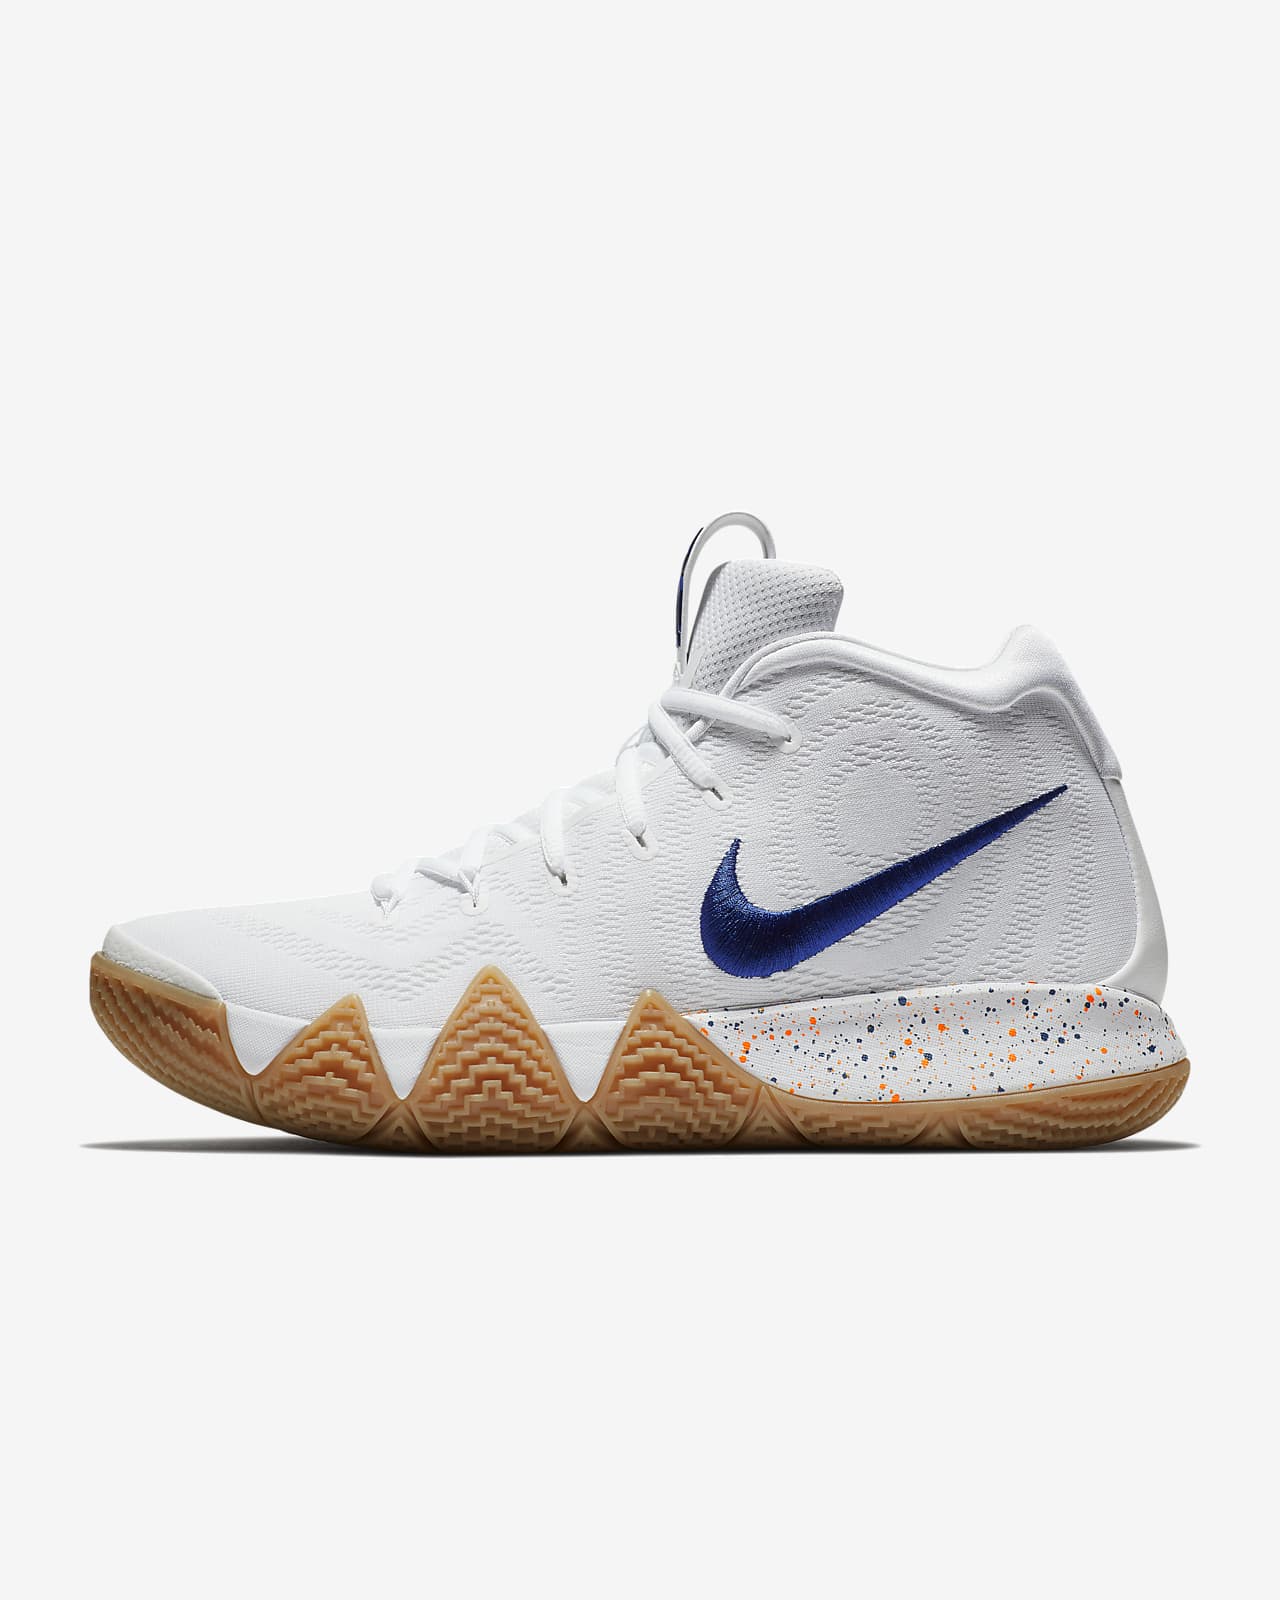 kyrie 4 ps4